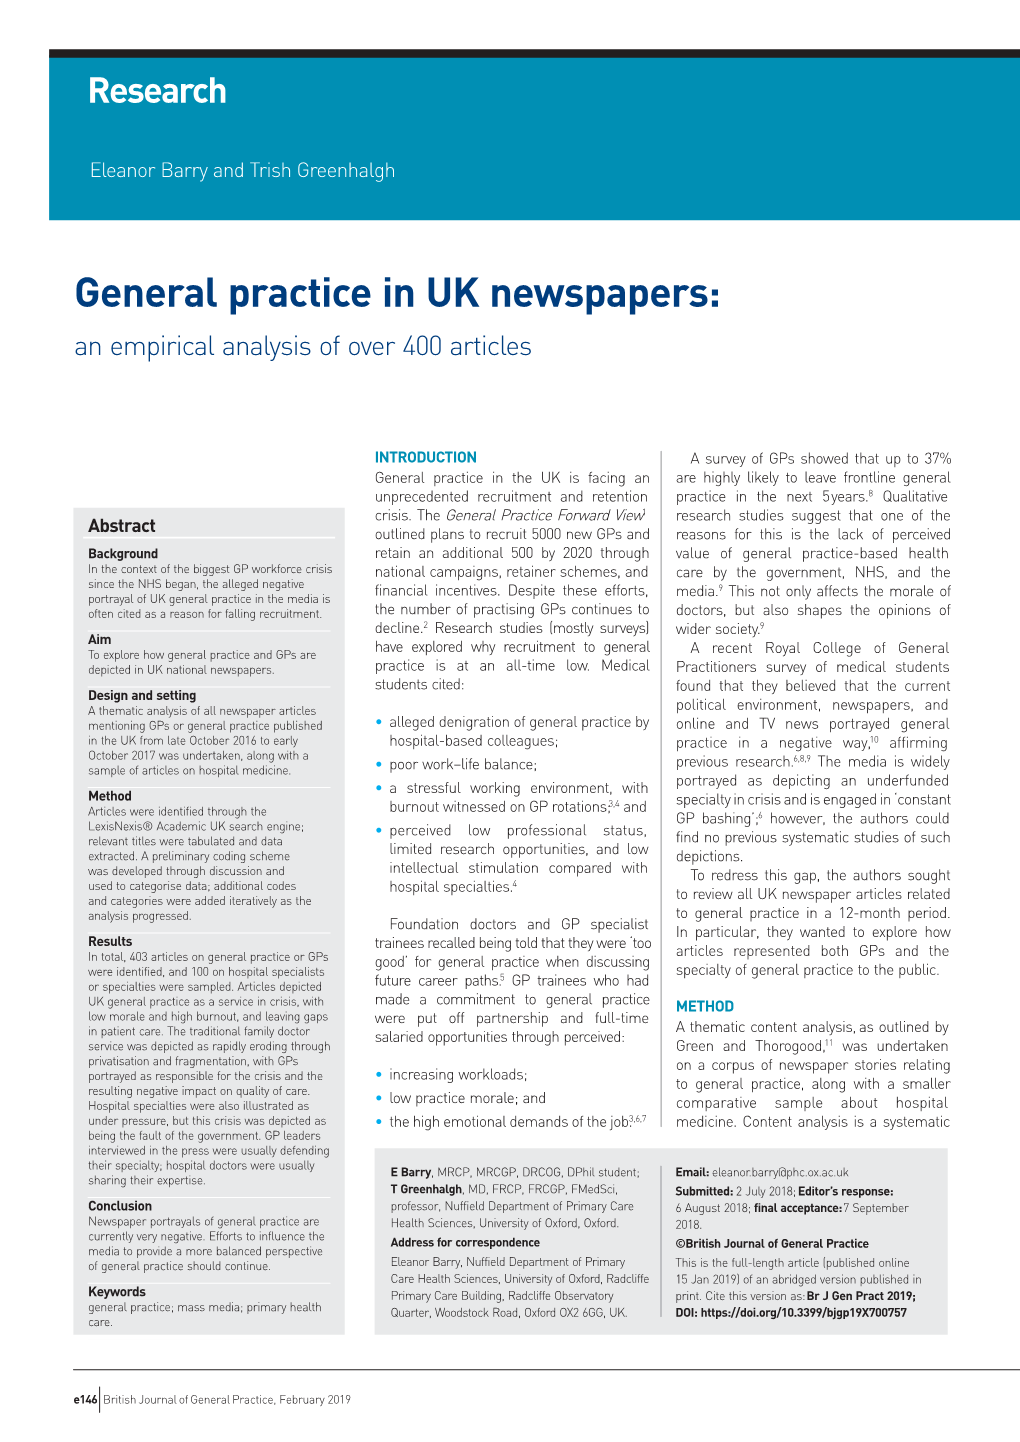 General Practice in UK Newspapers: an Empirical Analysis of Over 400 Articles